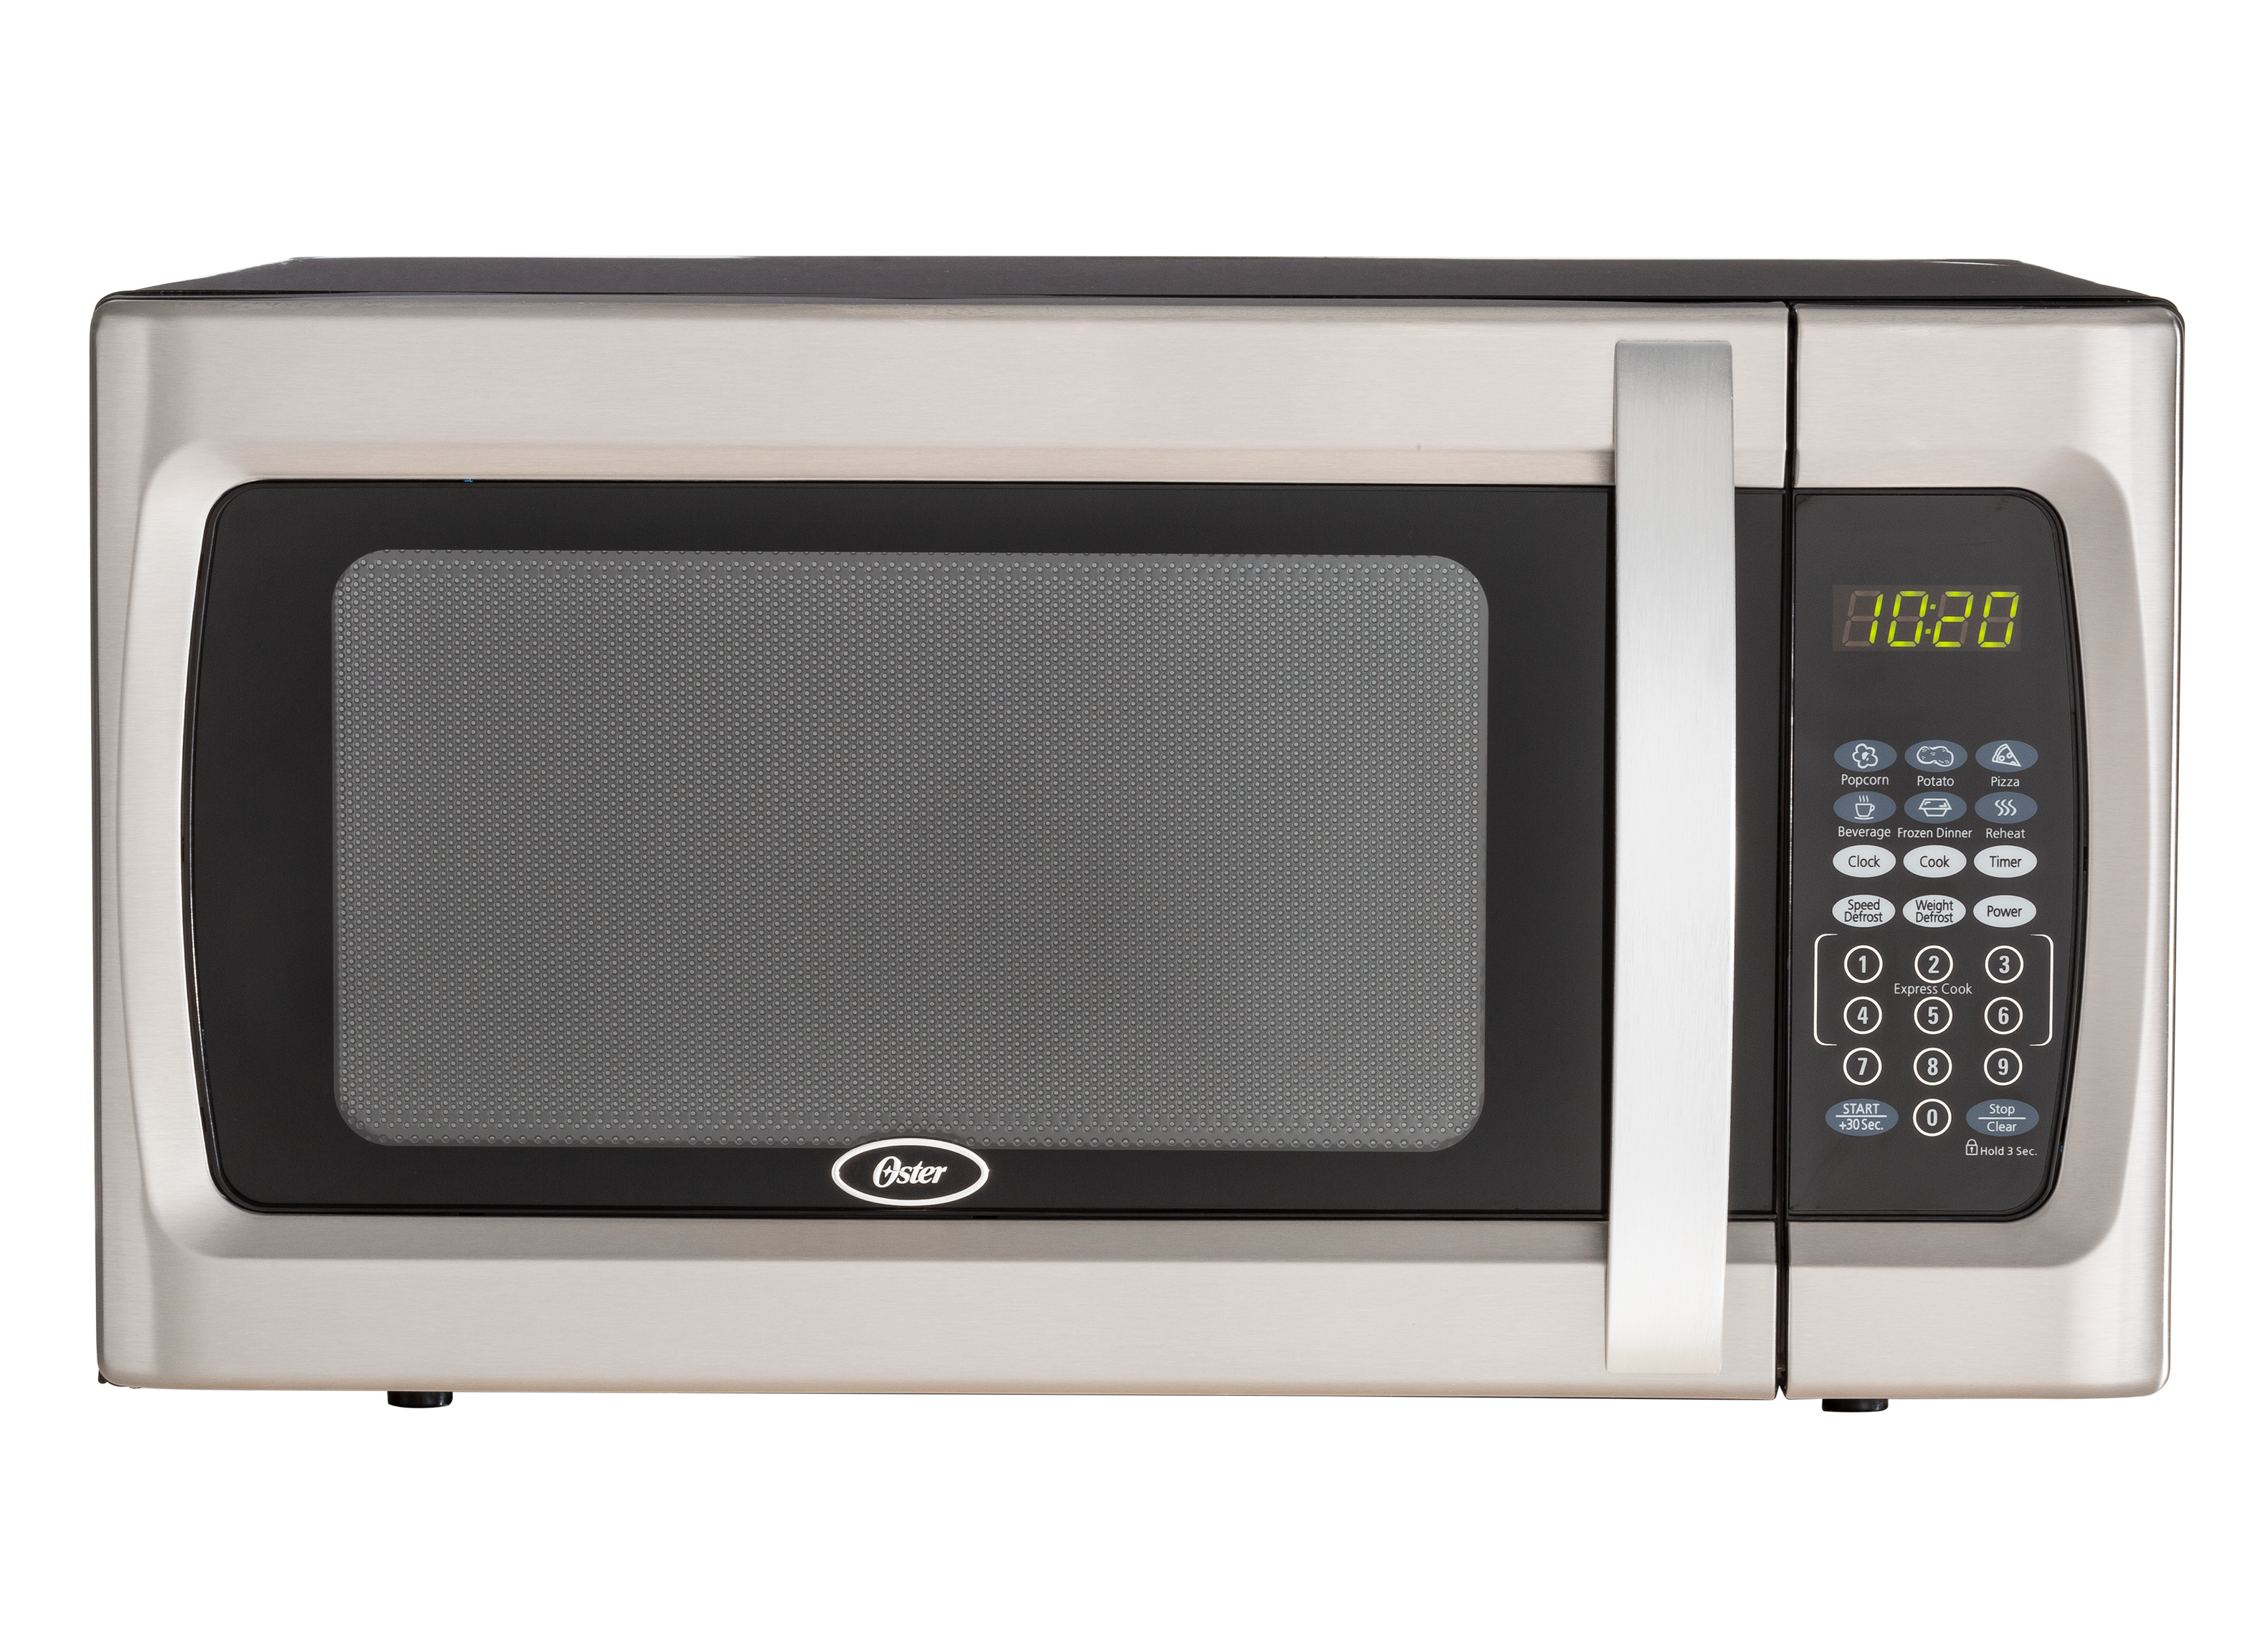 https://crdms.images.consumerreports.org/prod/products/cr/models/403477-large-countertop-microwaves-oster-ogzf1301-10019899.png